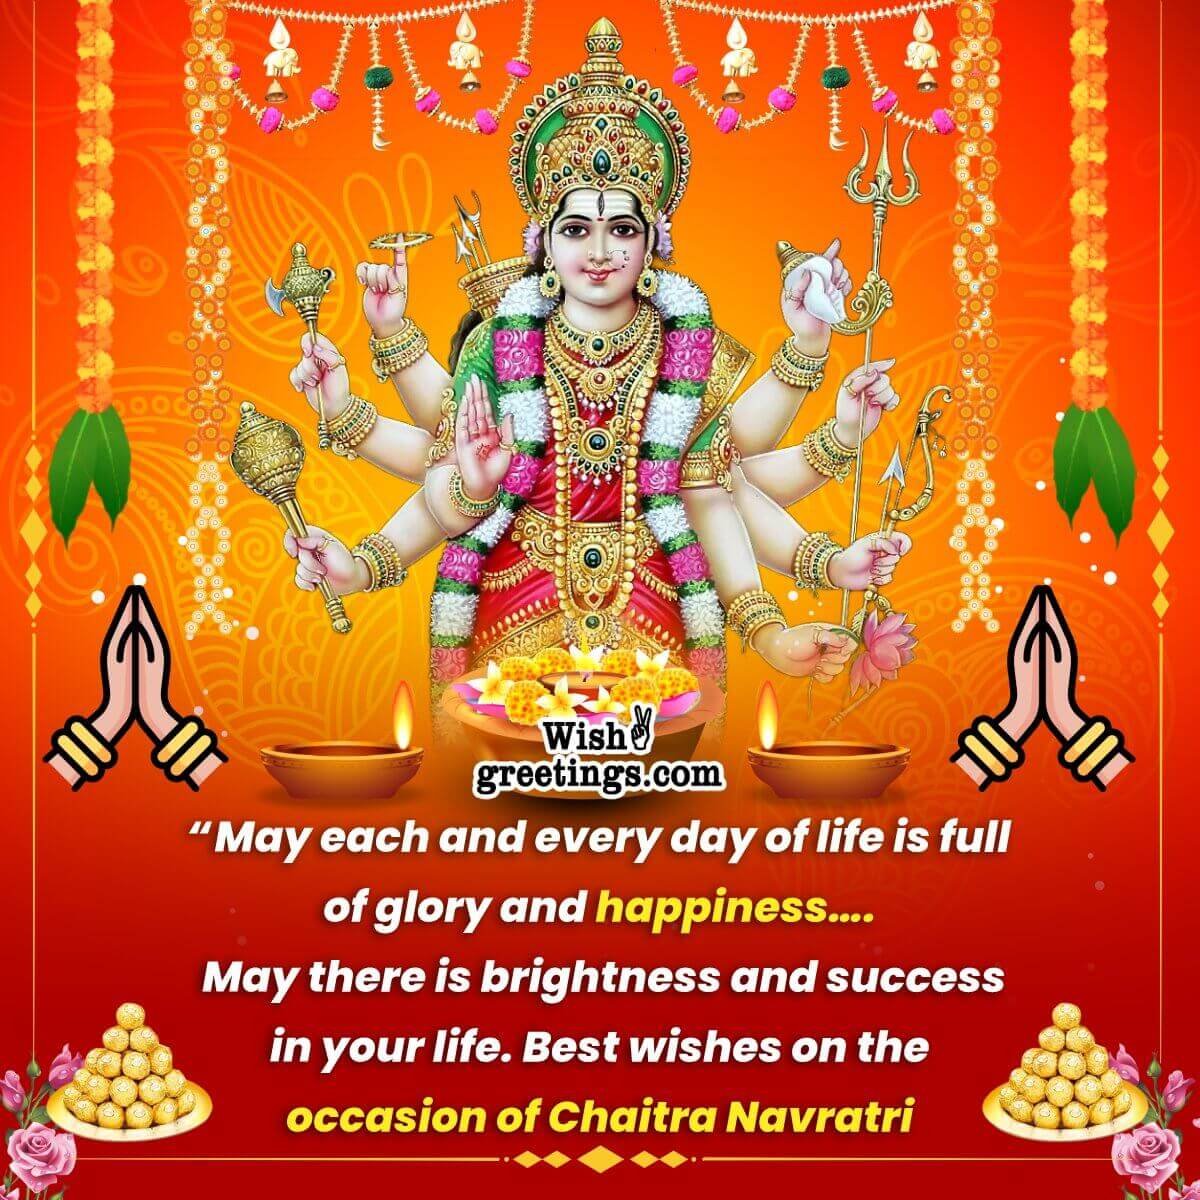 Happy Chaitra Navratri 2021 Images Wishes Messages Greetings And Porn Sex Picture 8211